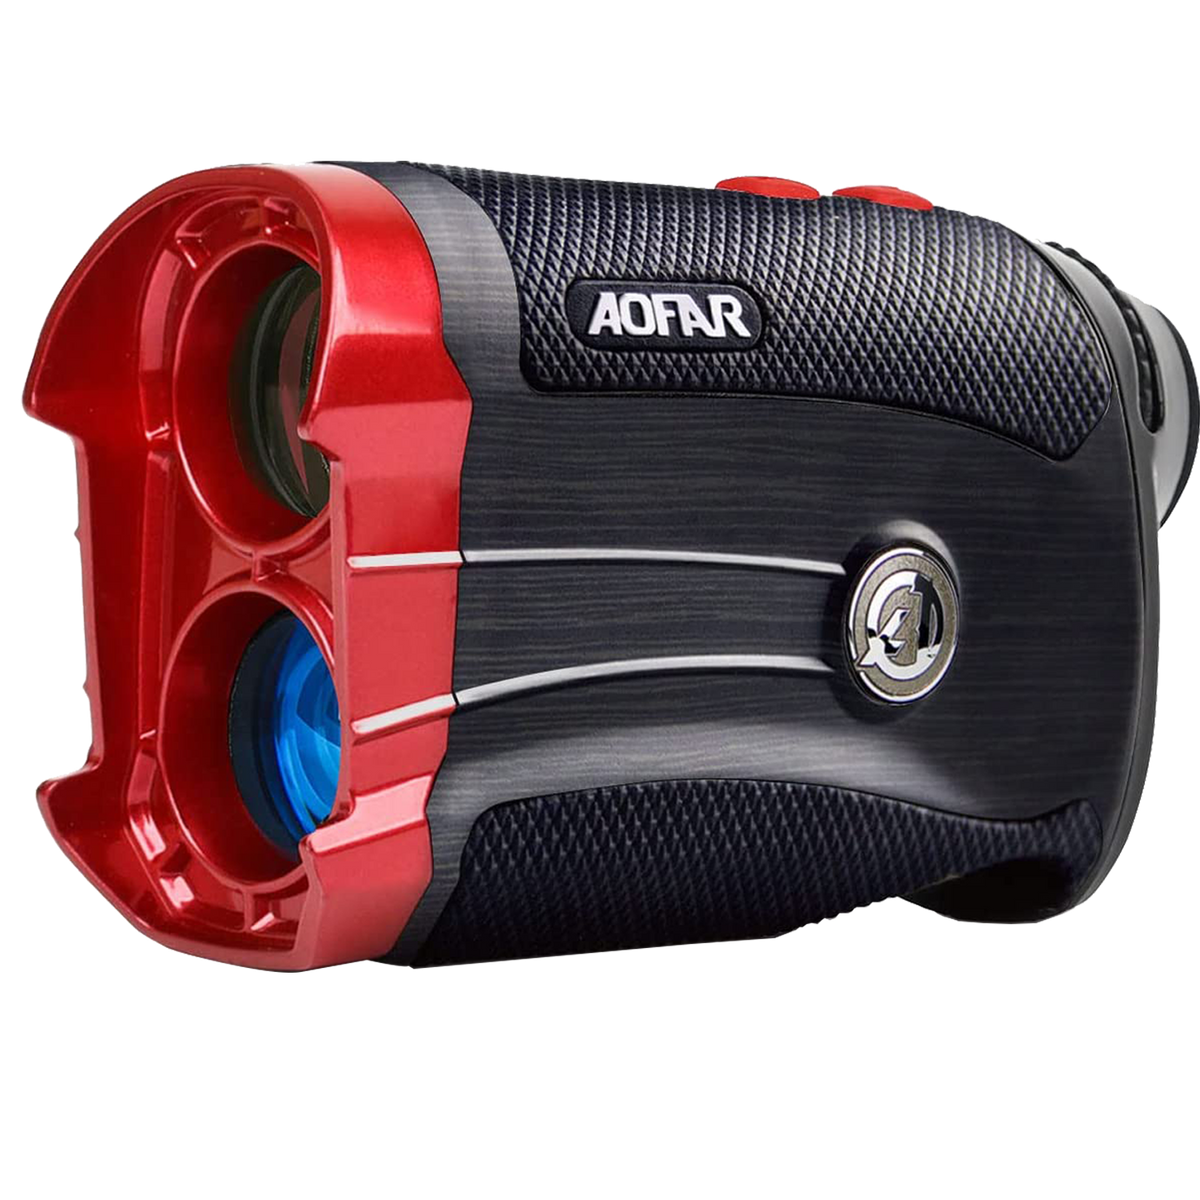 AOFAR GX-2S Golf Range Finder 600 Yards with Slope,Continuous Scan 